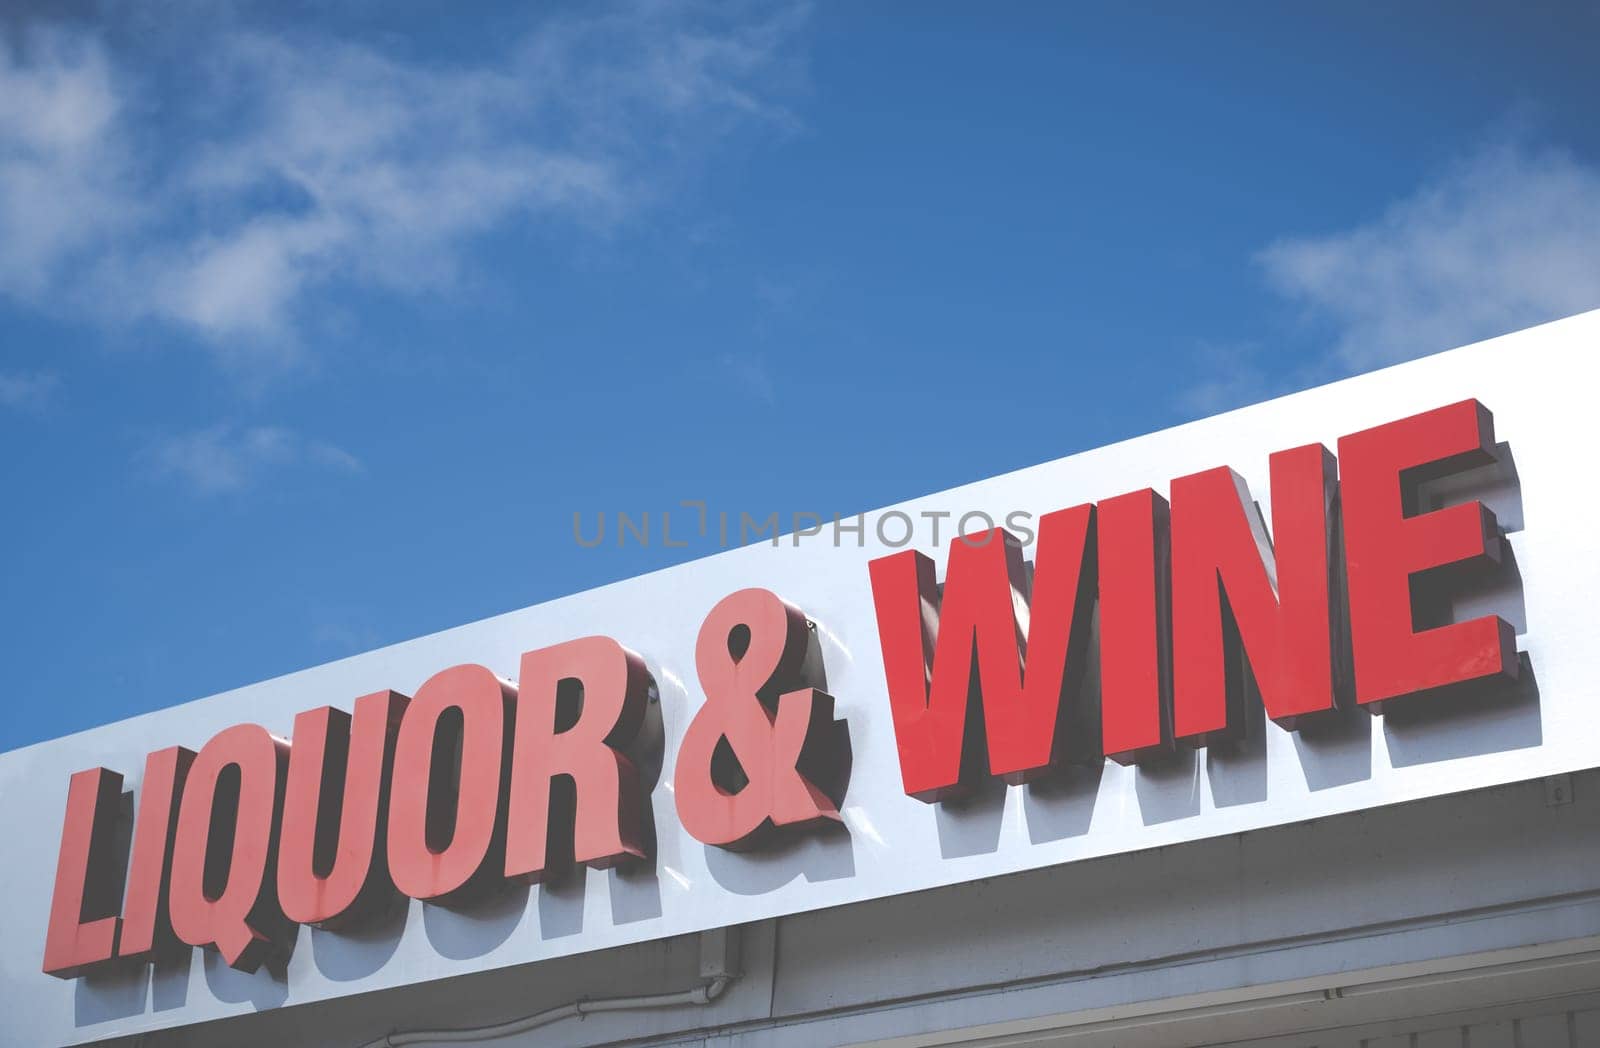 A Sign For A Liquor And Wine Store Against A Bright Blue Sky